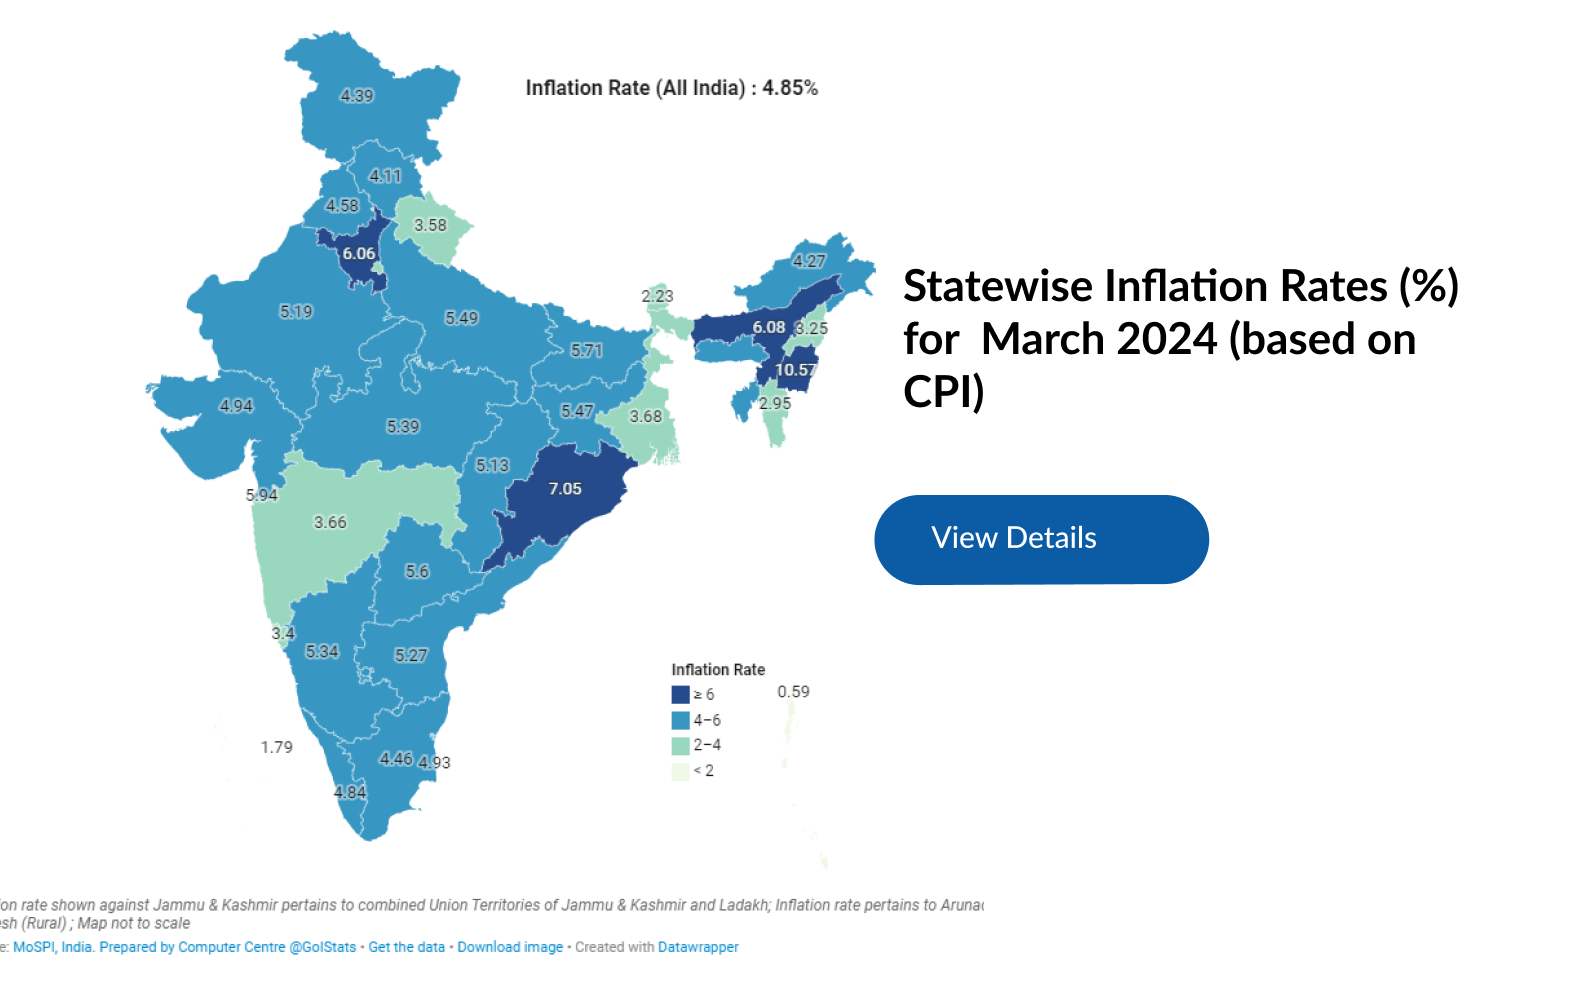 Statewise Inflation Rates